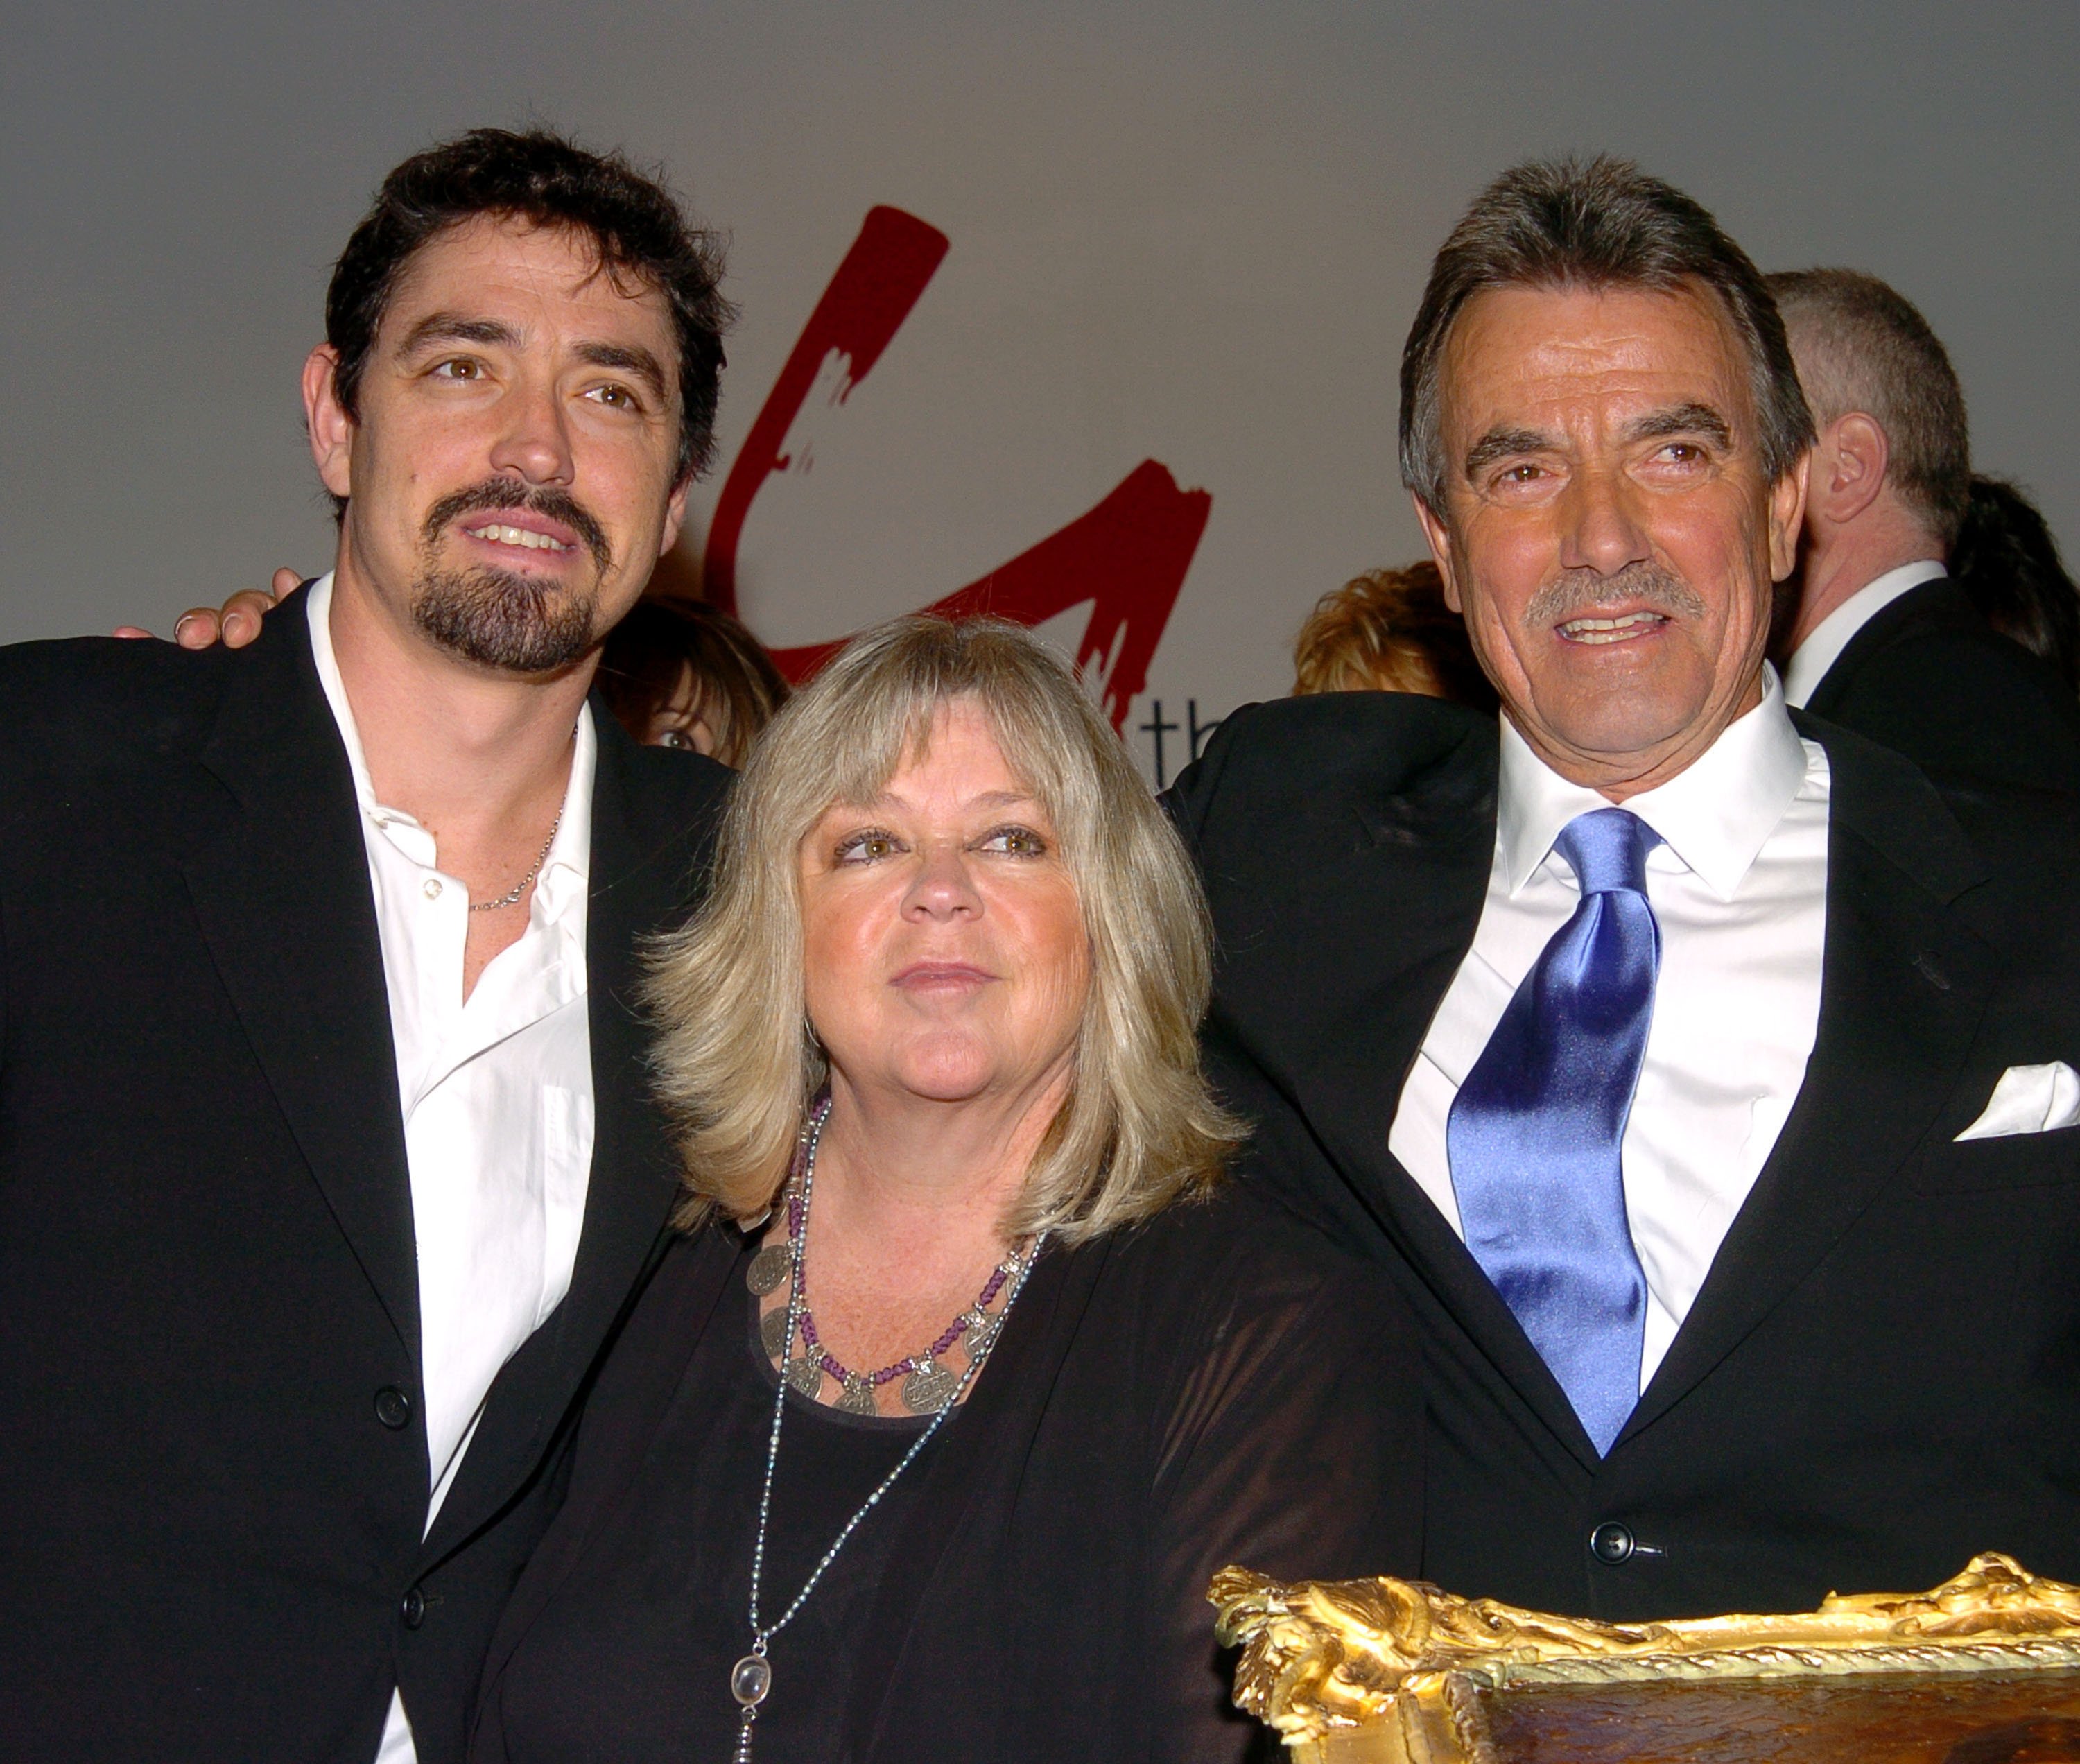 Christian Gudegast, Gale Gudegast, and Eric Braeden as Braeden celebrates his 25th Anniversary on "The Young and the Restless" |  Source: Getty Images